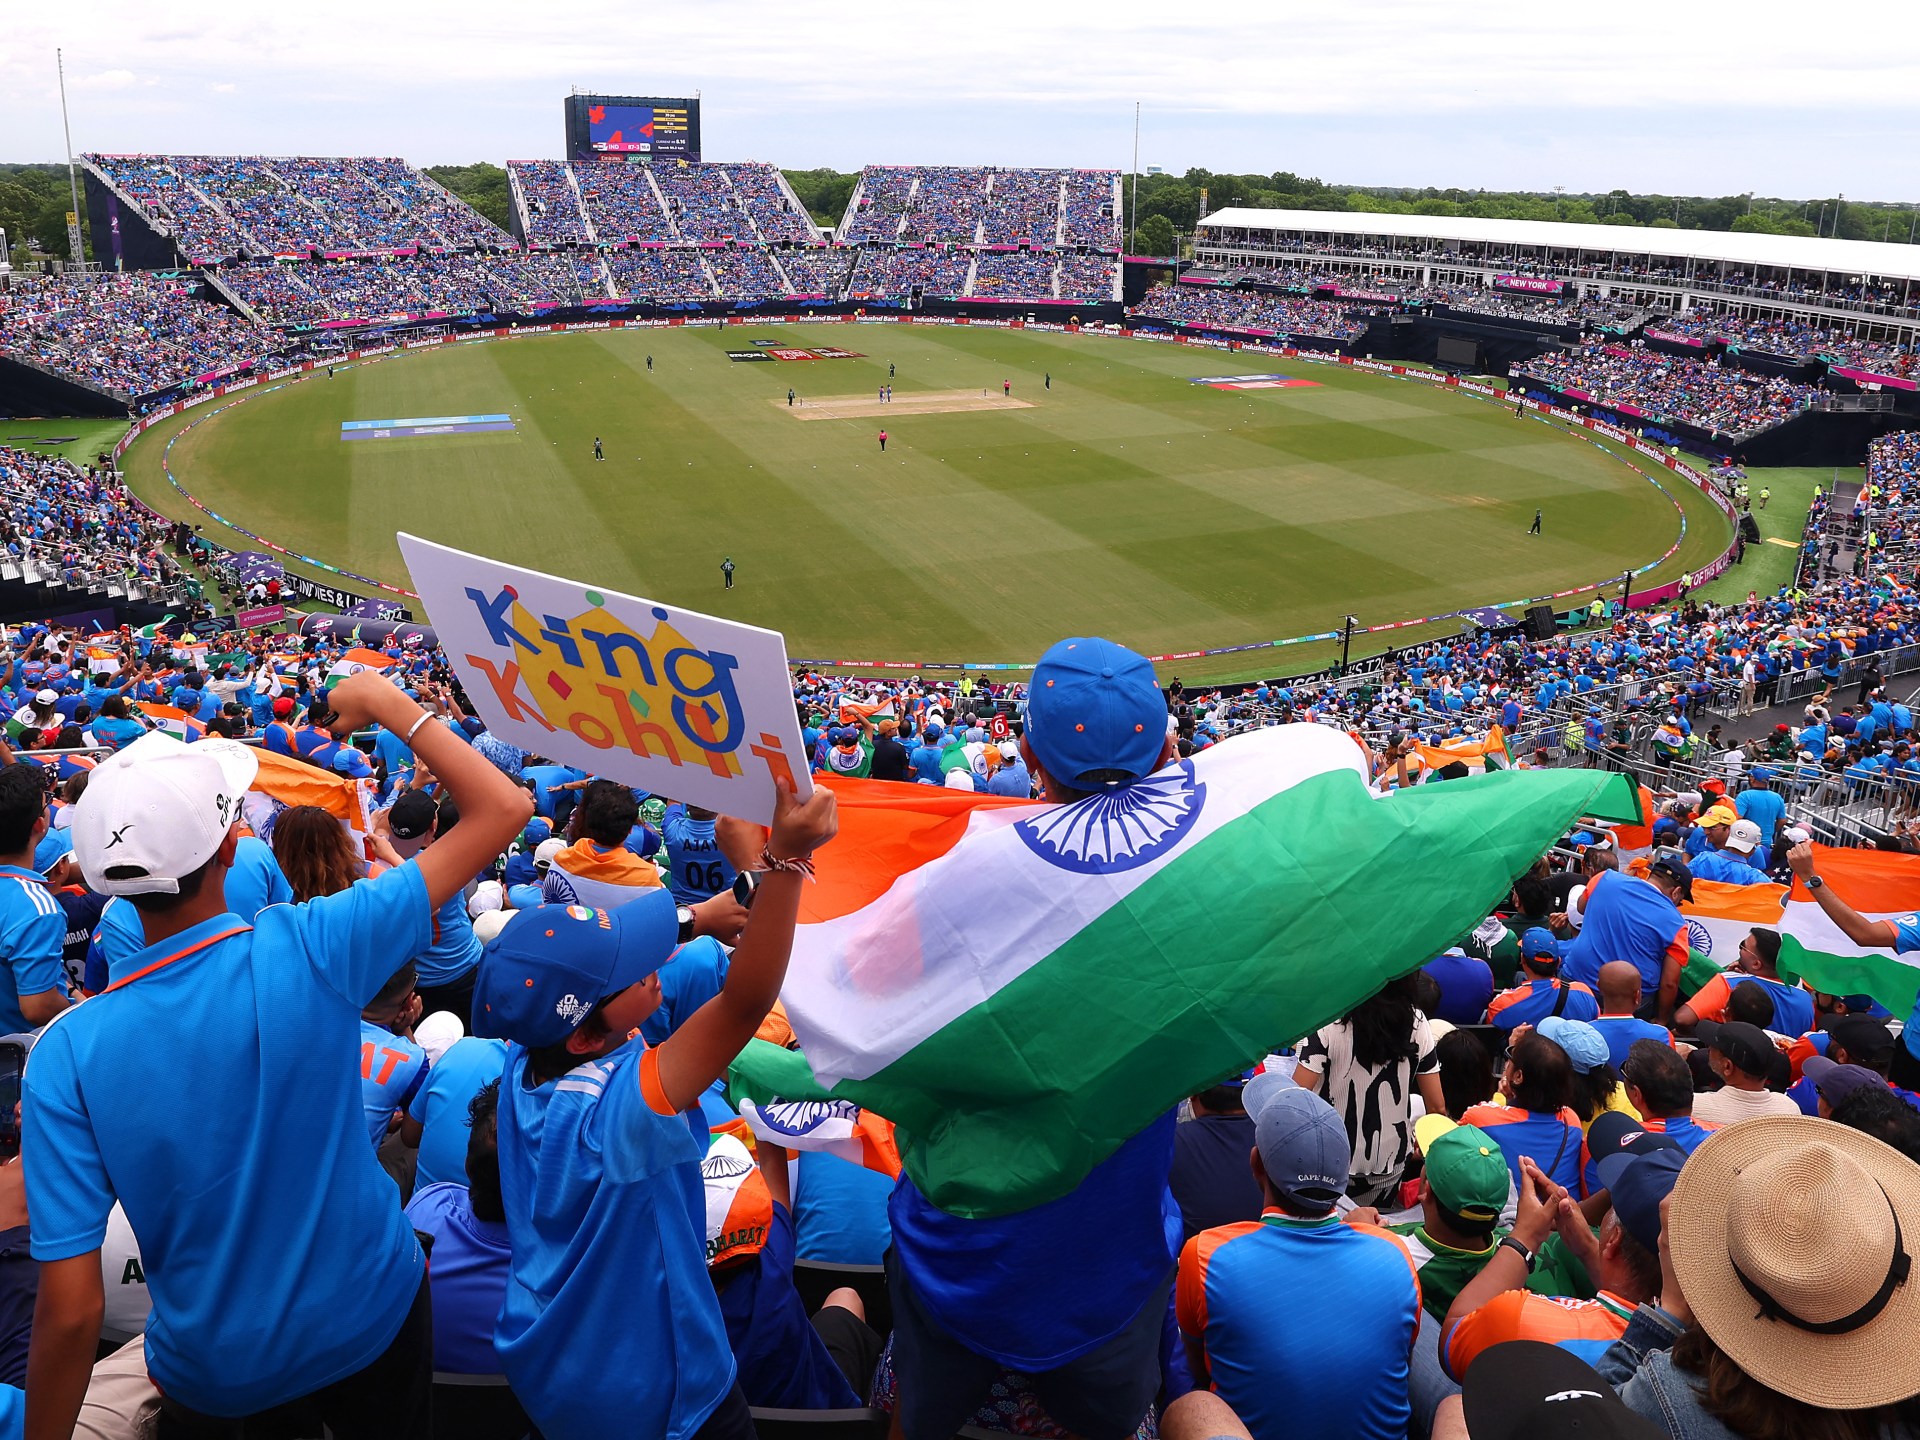 USA vs India How the home team could help convert Americans to cricket